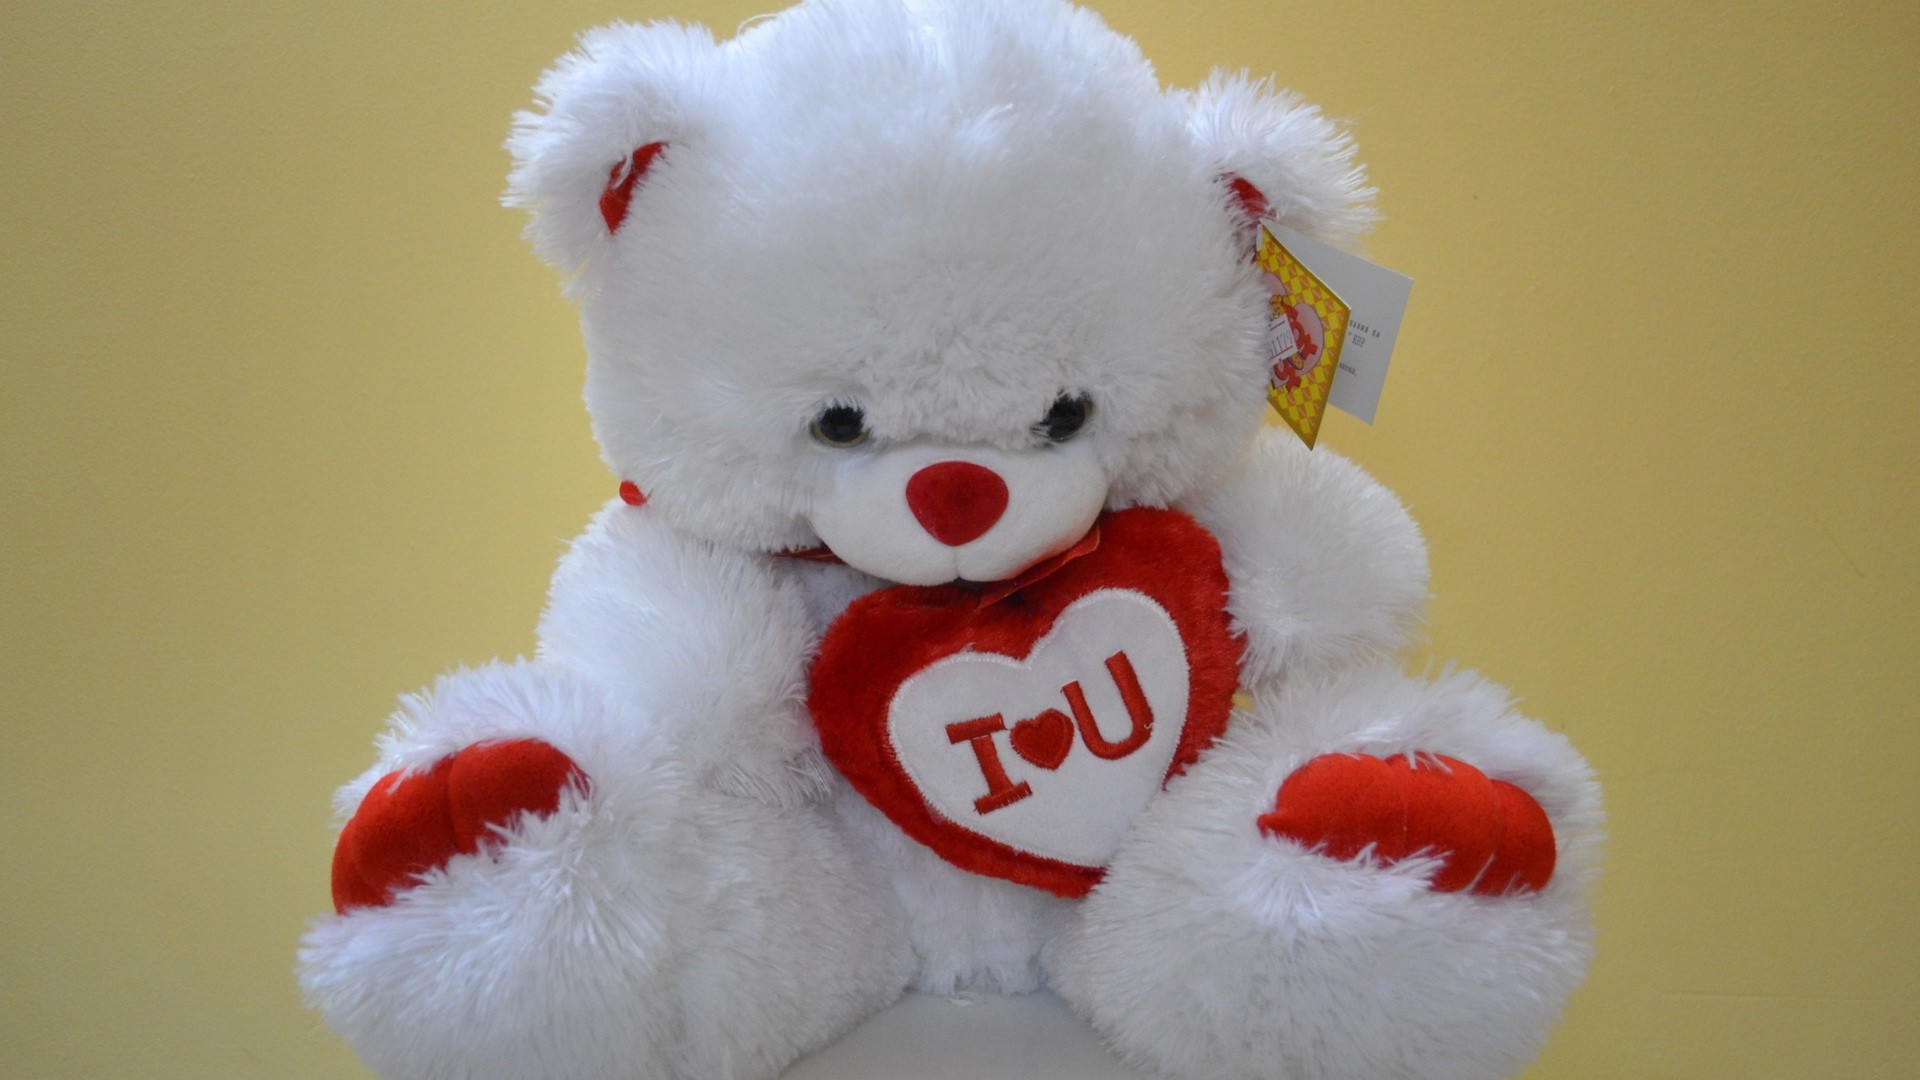 1920x1080 I love you white teddy bear wallpapers